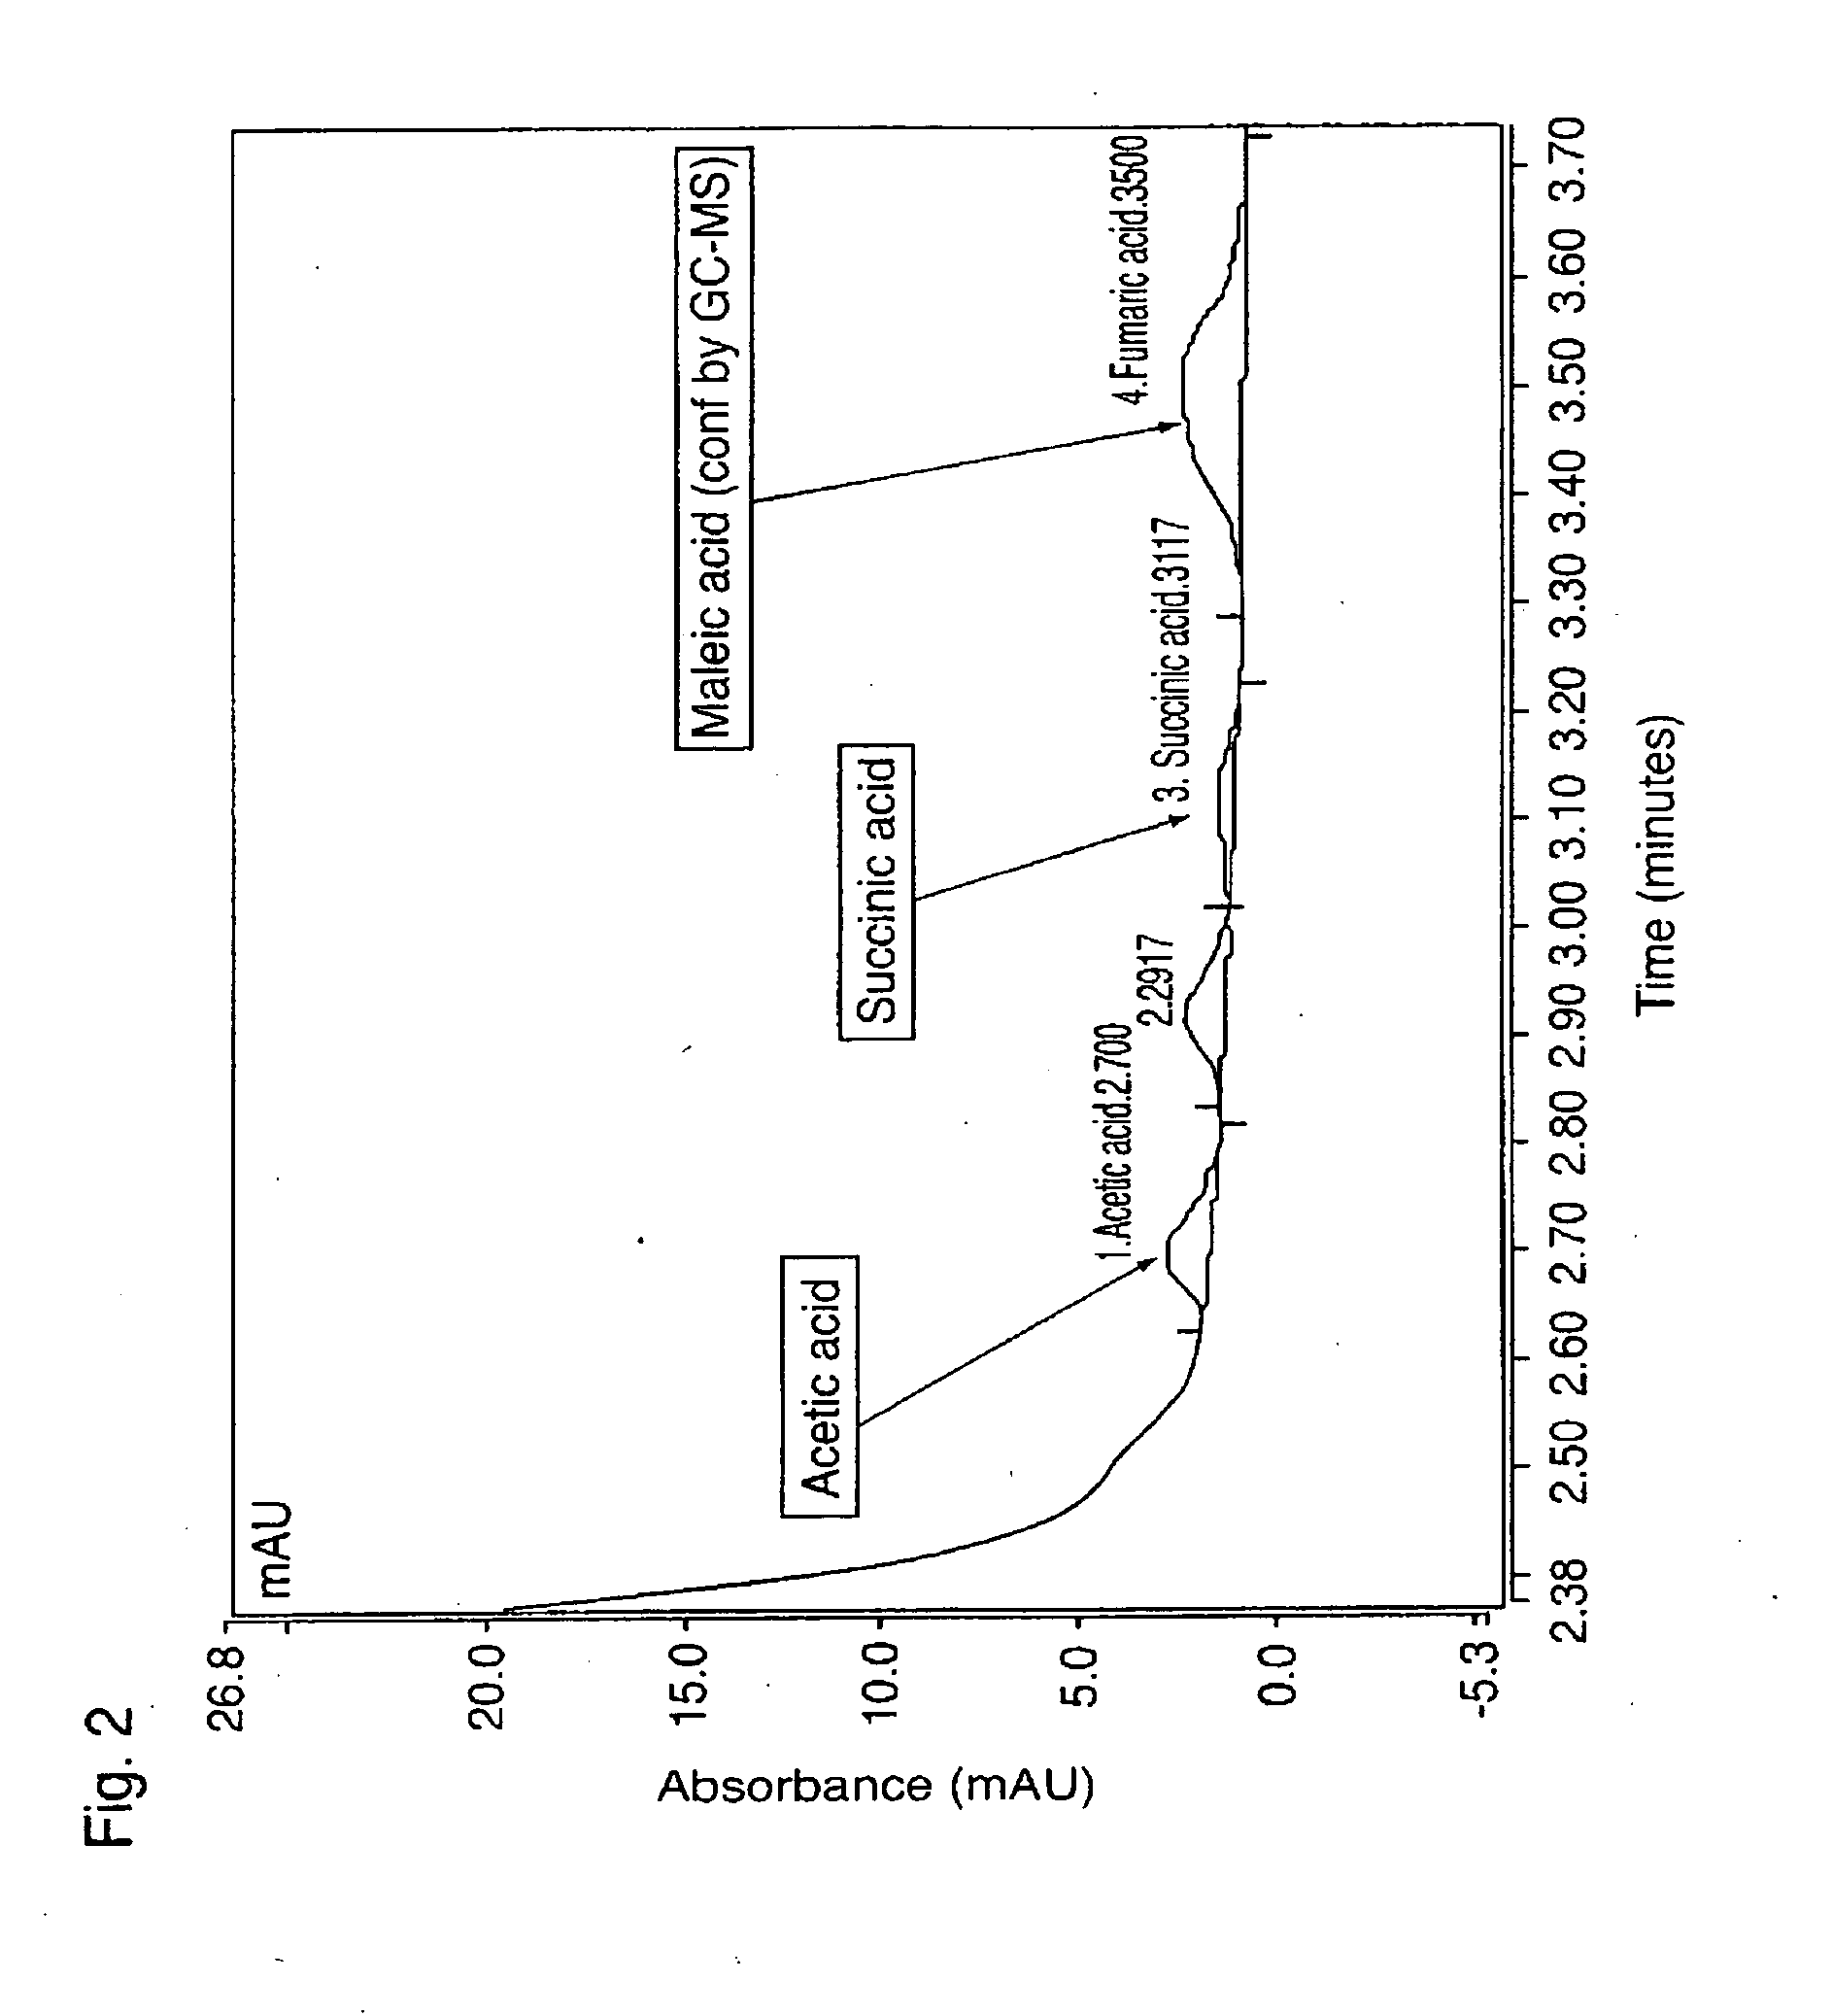 Method and process of producing short chain fatty acids from waste stream containing phenolic lignin model compounds by controlled photocatalytic oxidation with titanium dioxide nanocatalyst in the presence of ultraviolet radiation